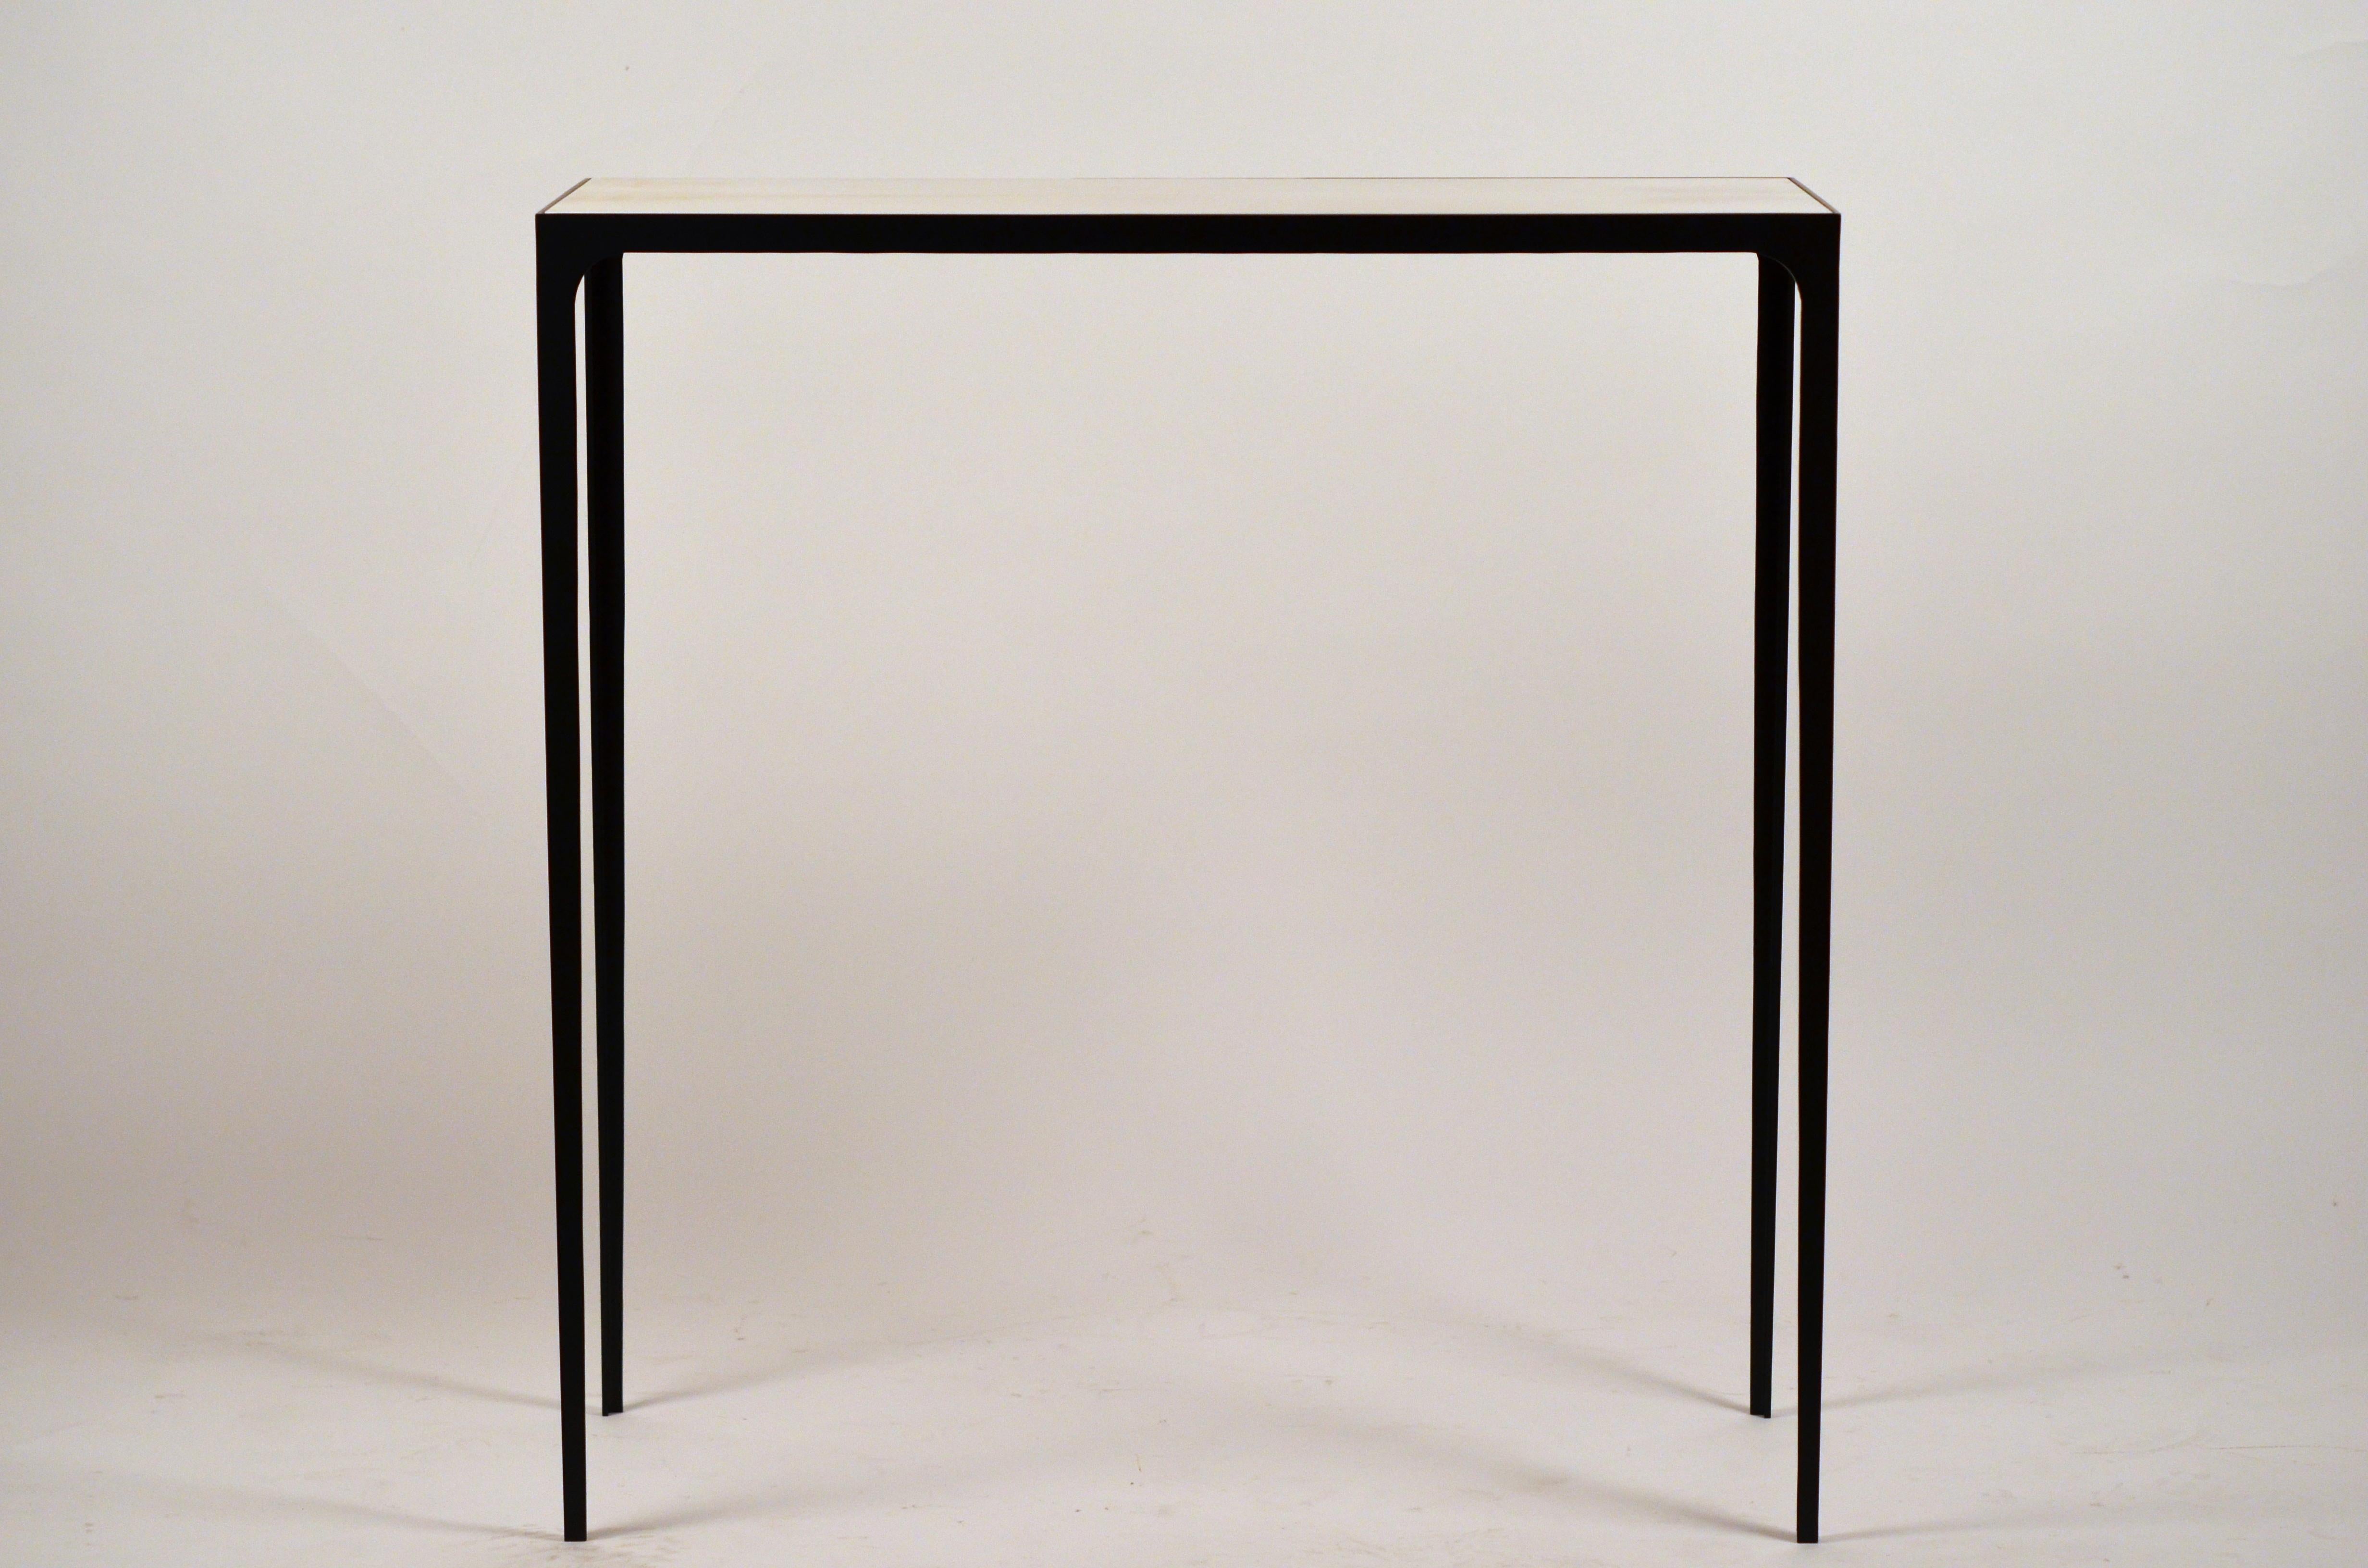 Chic 'Esquisse' wrought Iron and ivory parchment console by Design Frères. Contrasting ivory goat parchment top over slender blackened steel base. Beautifully simple, understated design.